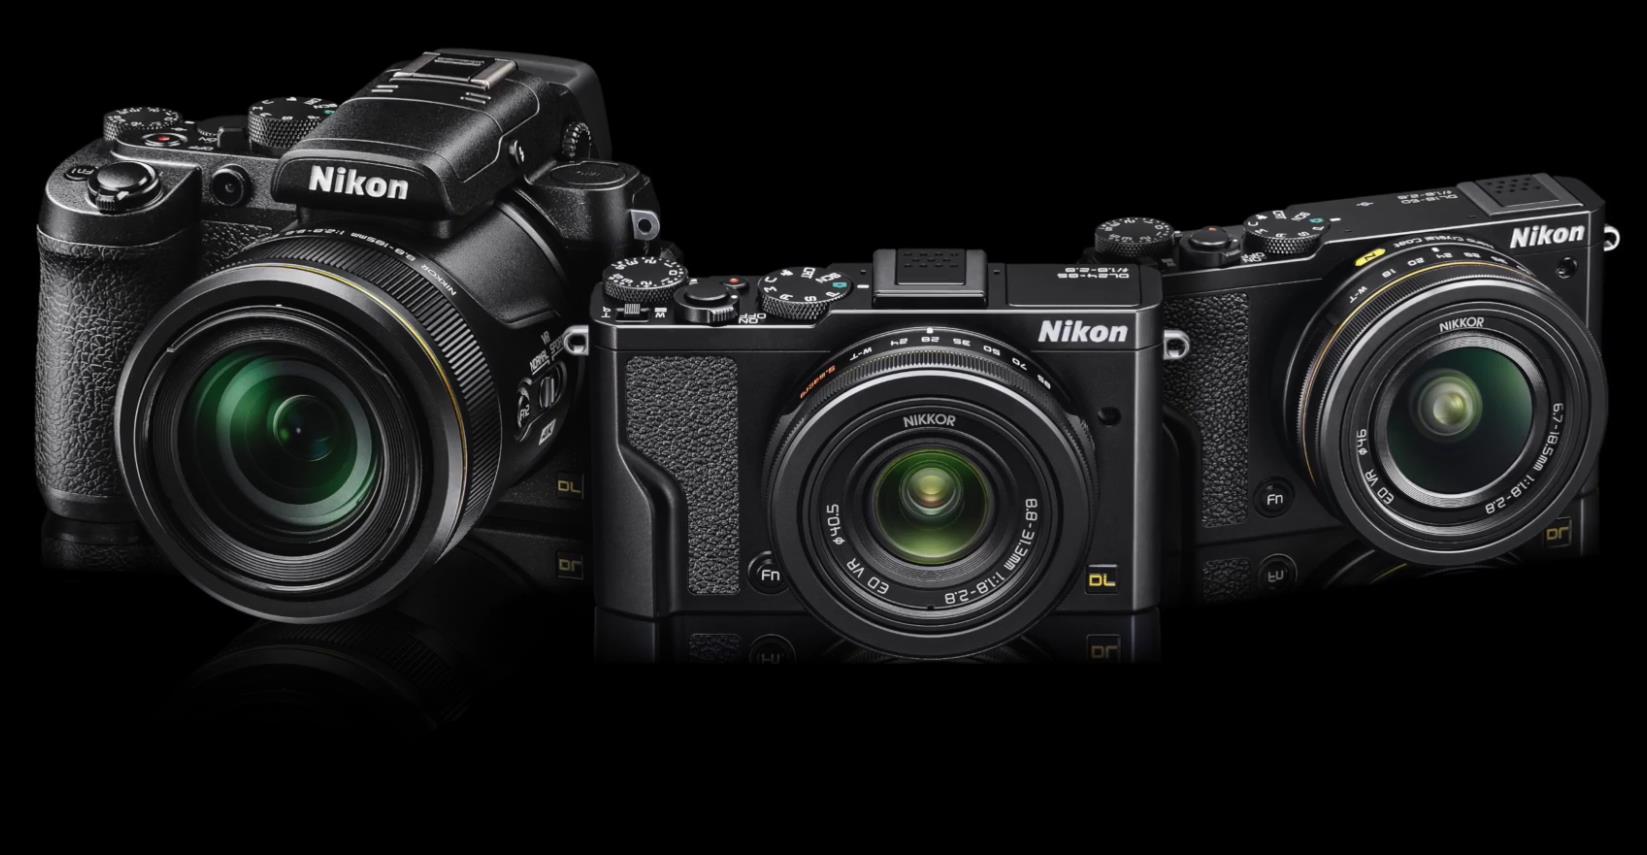 Nikon DL18-50, DL24-85, DL24-500, COOLPIX B700, B500, A900 now Available for Pre-order !